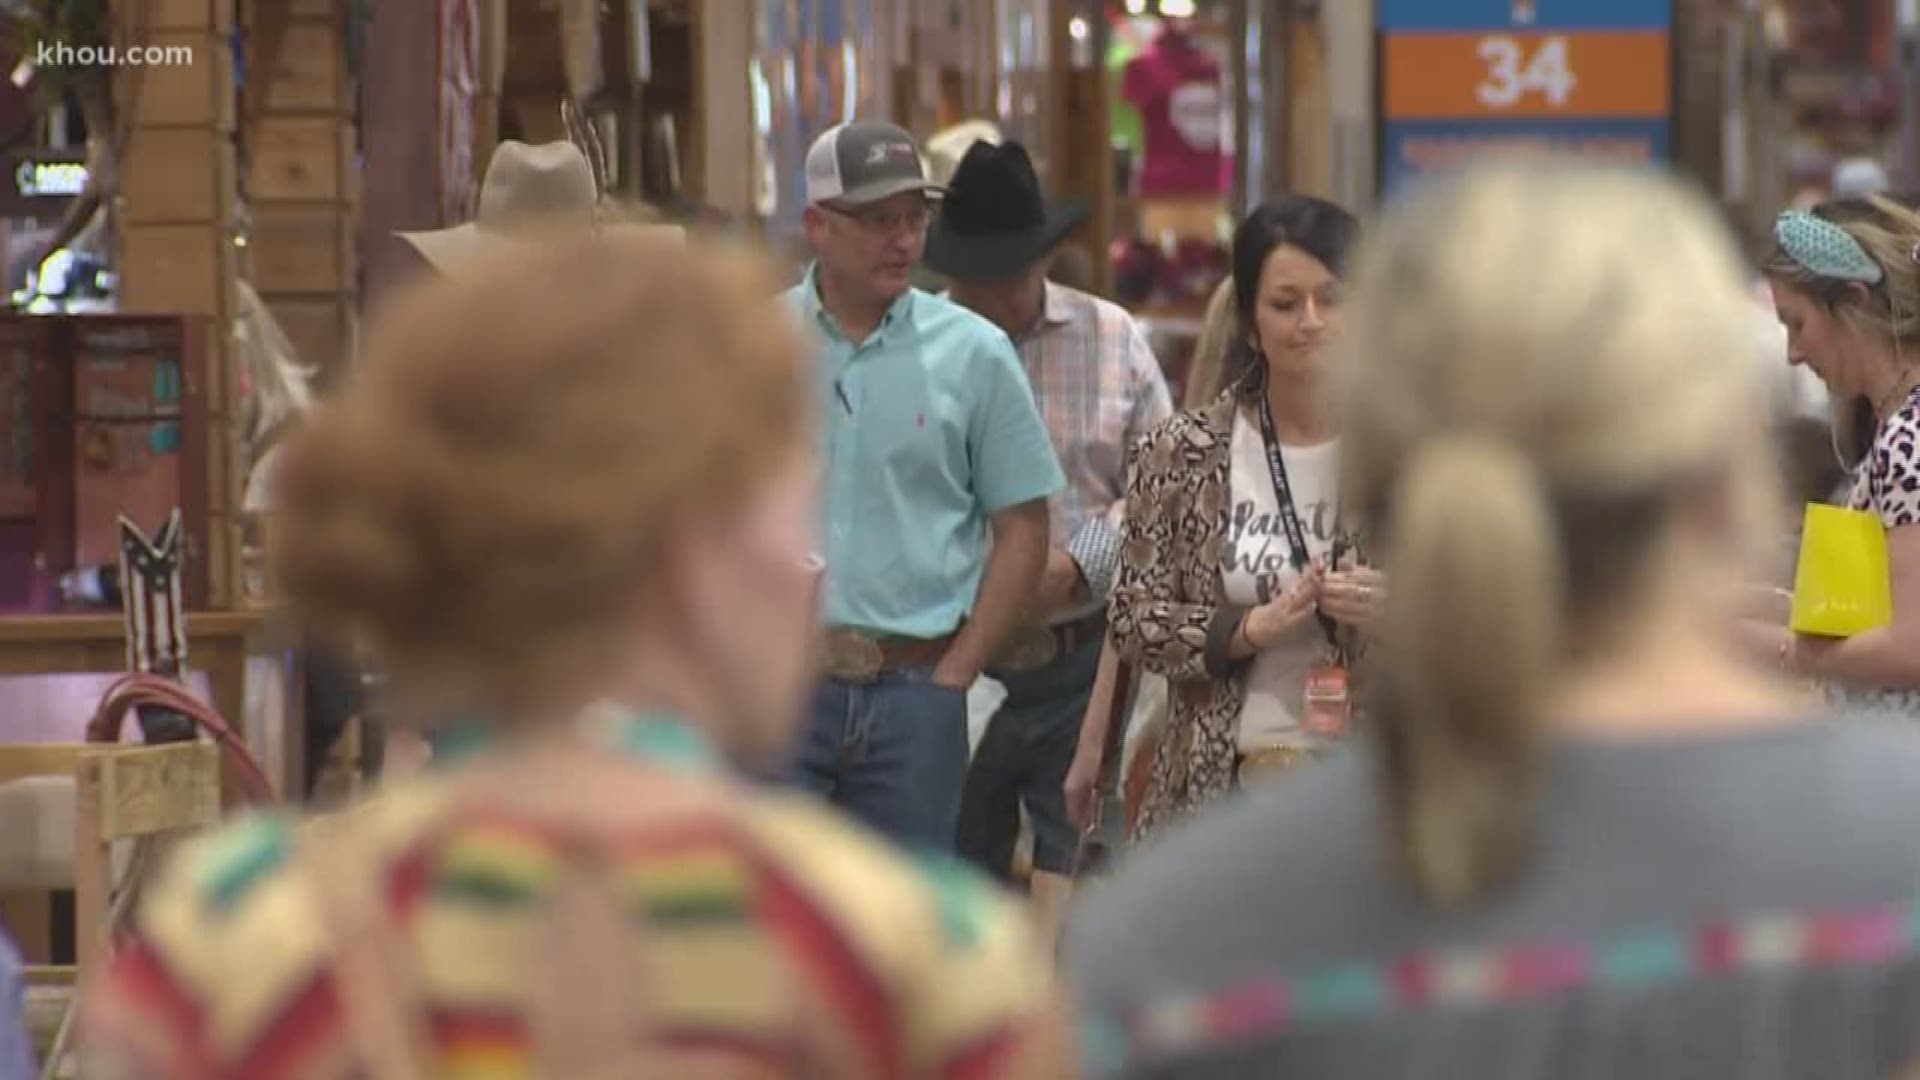 The 2020 Houston Livestock Show and Rodeo has been canceled due to coronavirus concerns, leaving vendors scrambling.